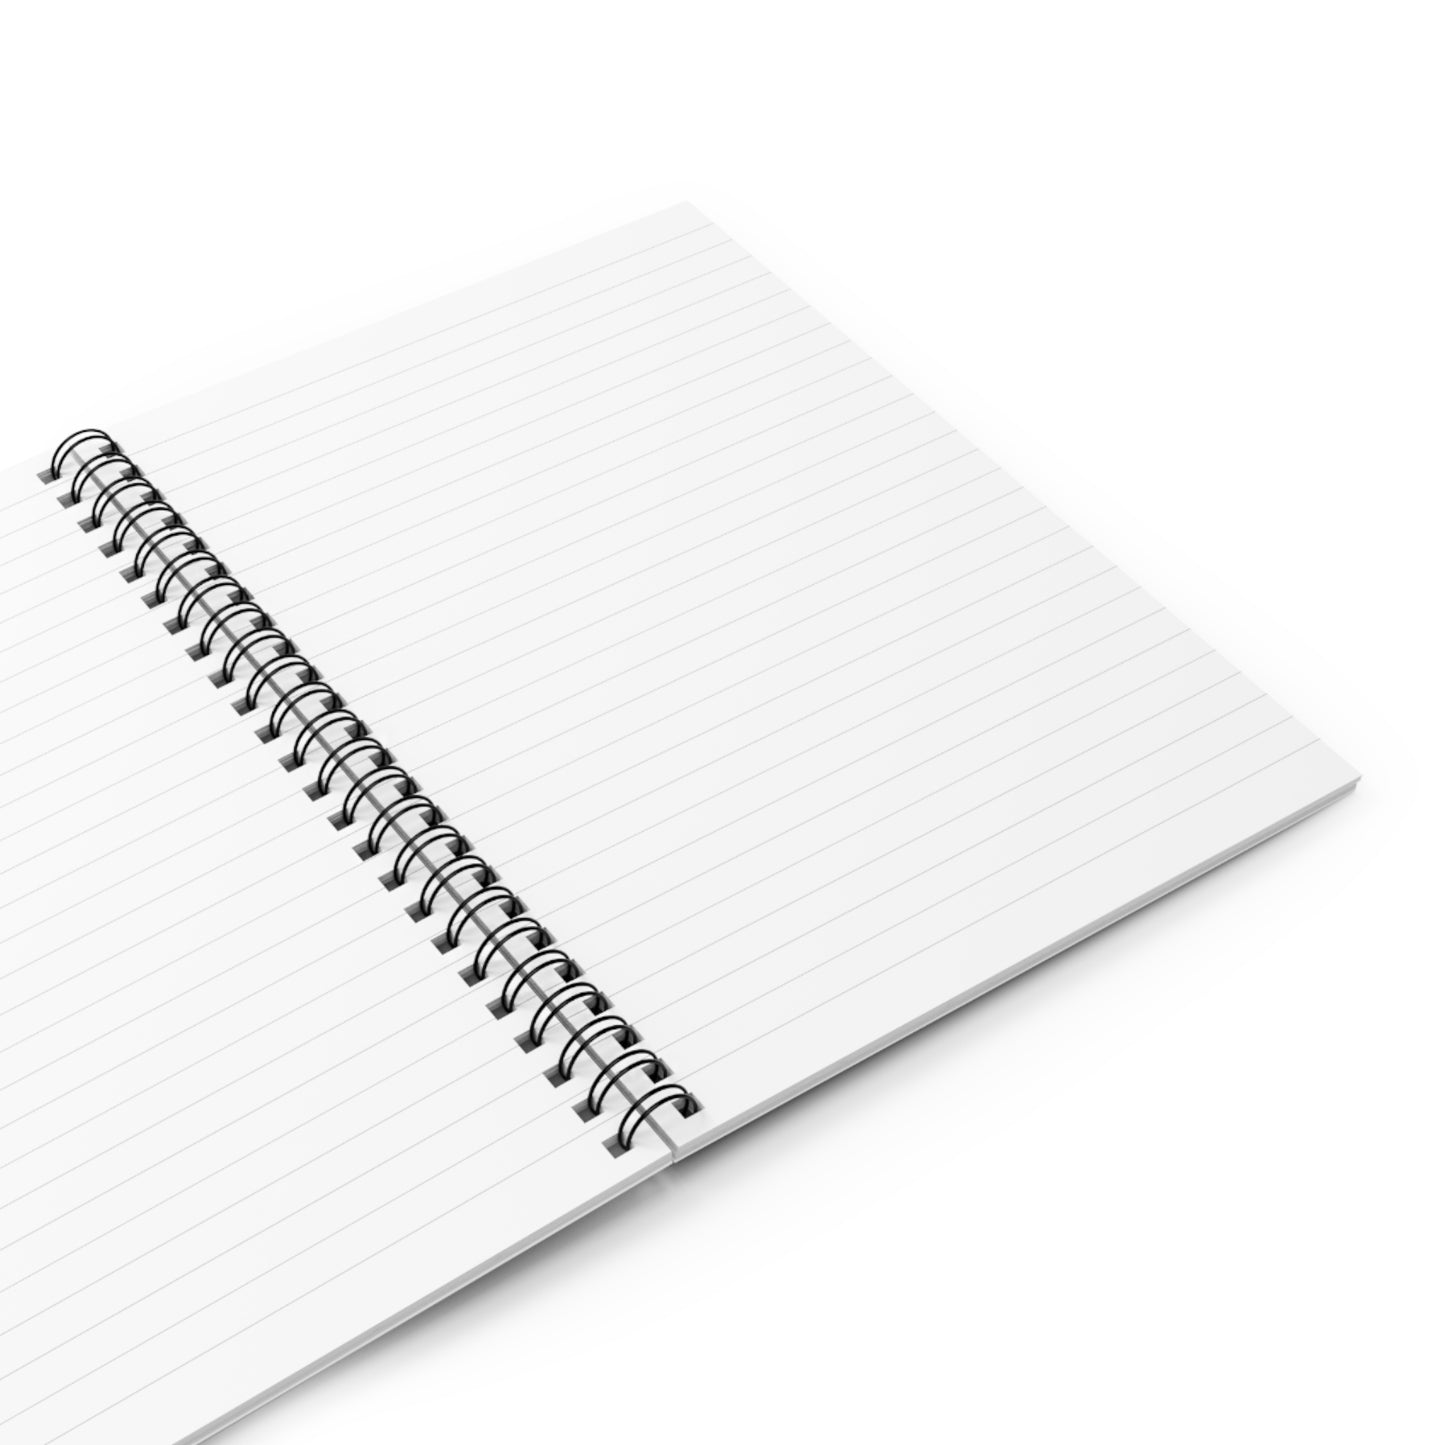 Photo of a notebook from The Wube Life Design Shop - spiral notebook that is ruled and lined.